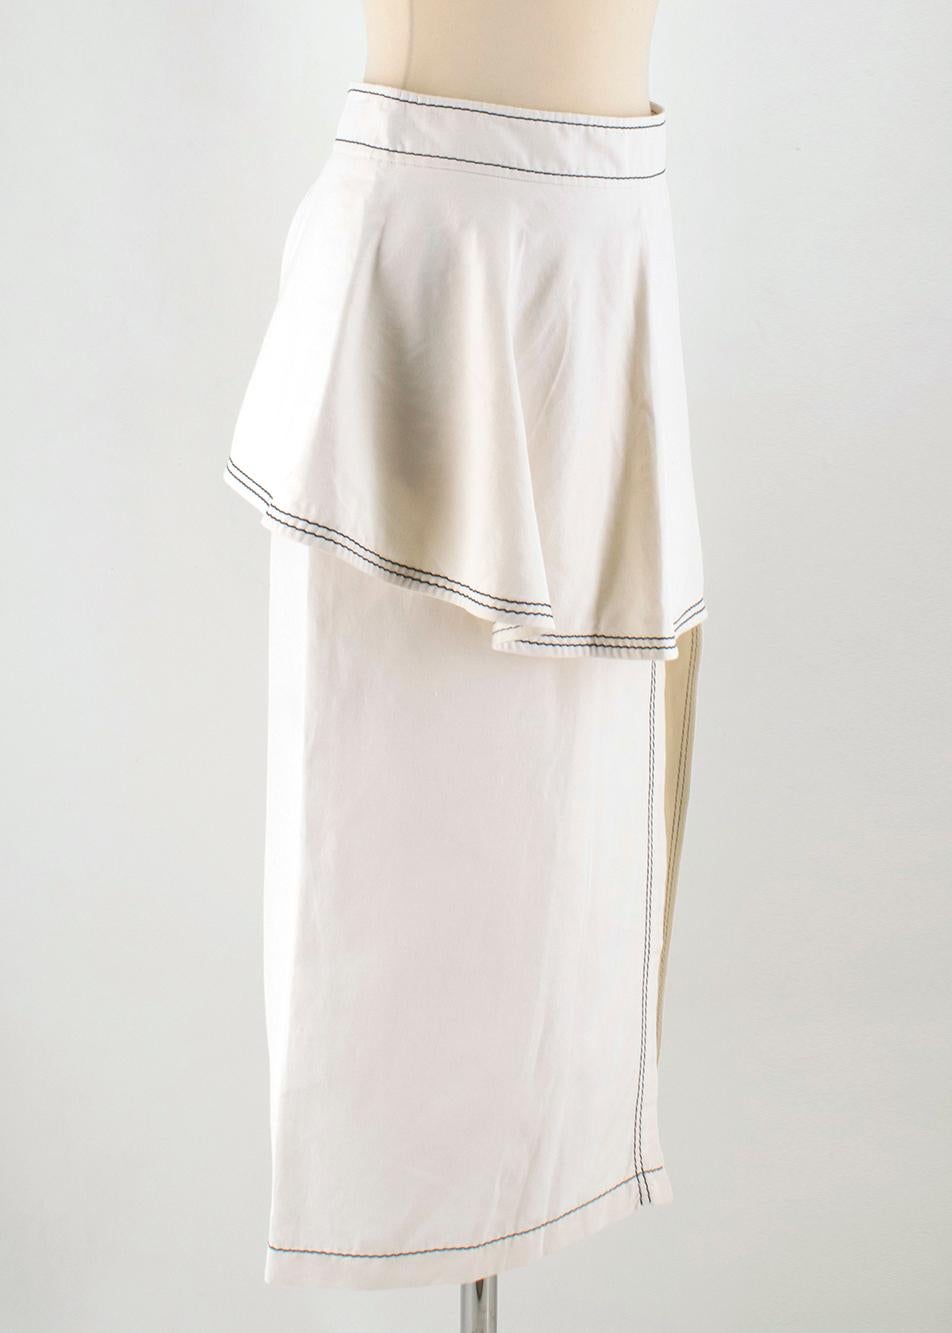 Stella McCartney Off-white Ruffle Straight Skirt 

- Off-white Straight Skirt
- Ruffle detail layer 
- back button fastening
- Front slit 
- Black stitched detailing
- 40%Polyamide, 36%Cotton, 24% Linen 

Please note, these items are pre-owned and